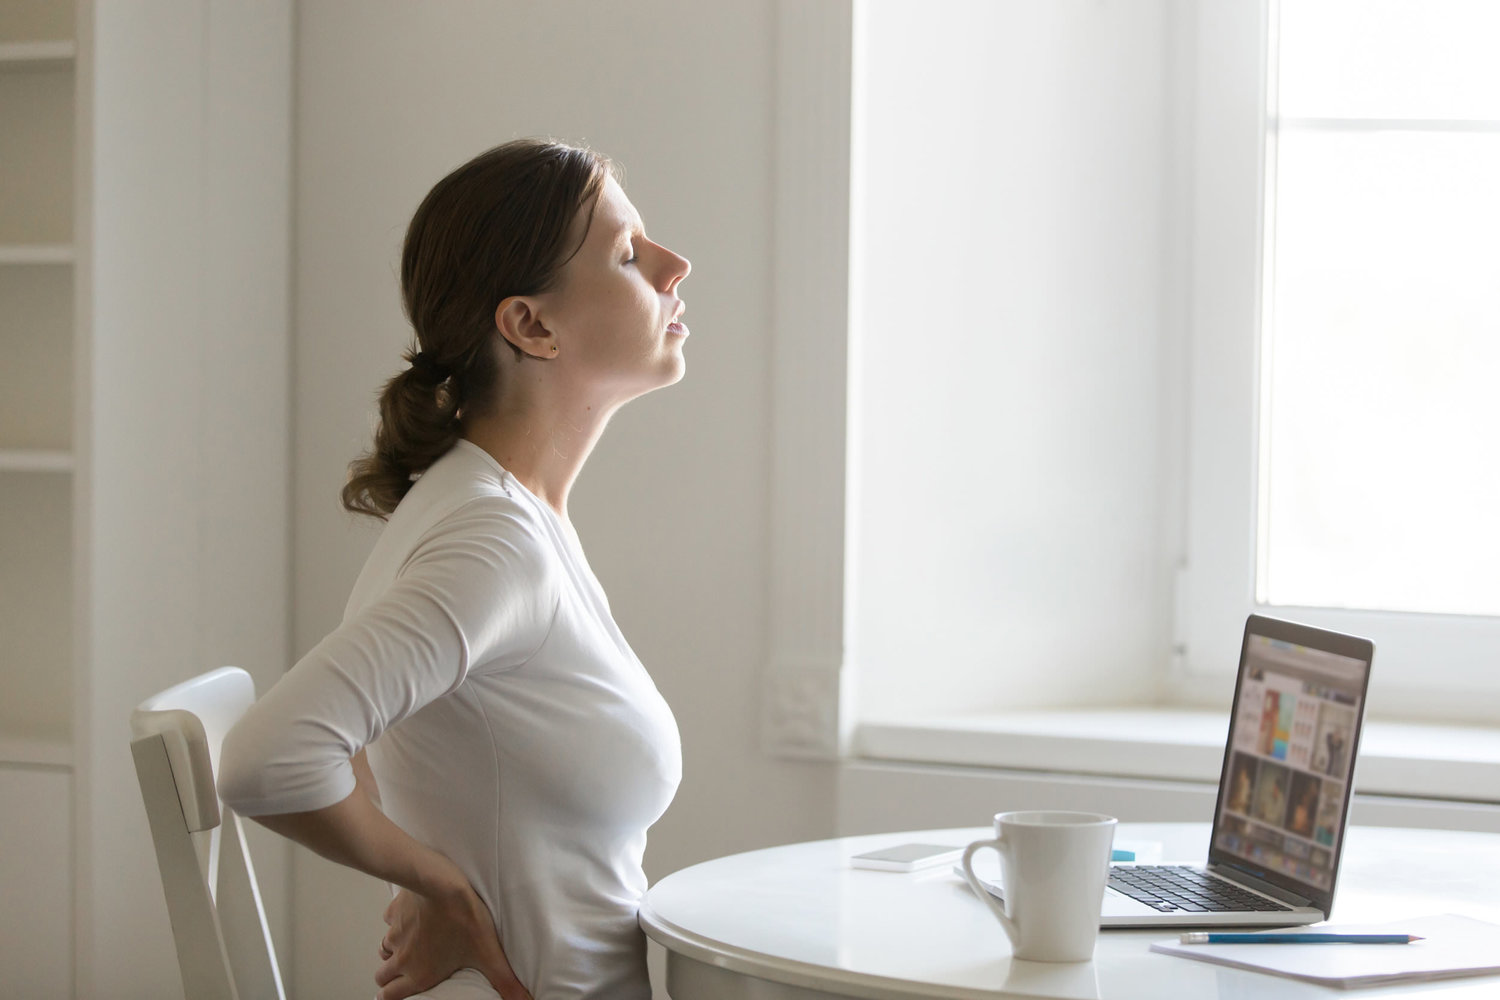 Does Stress Cause Back Pain? You Bet